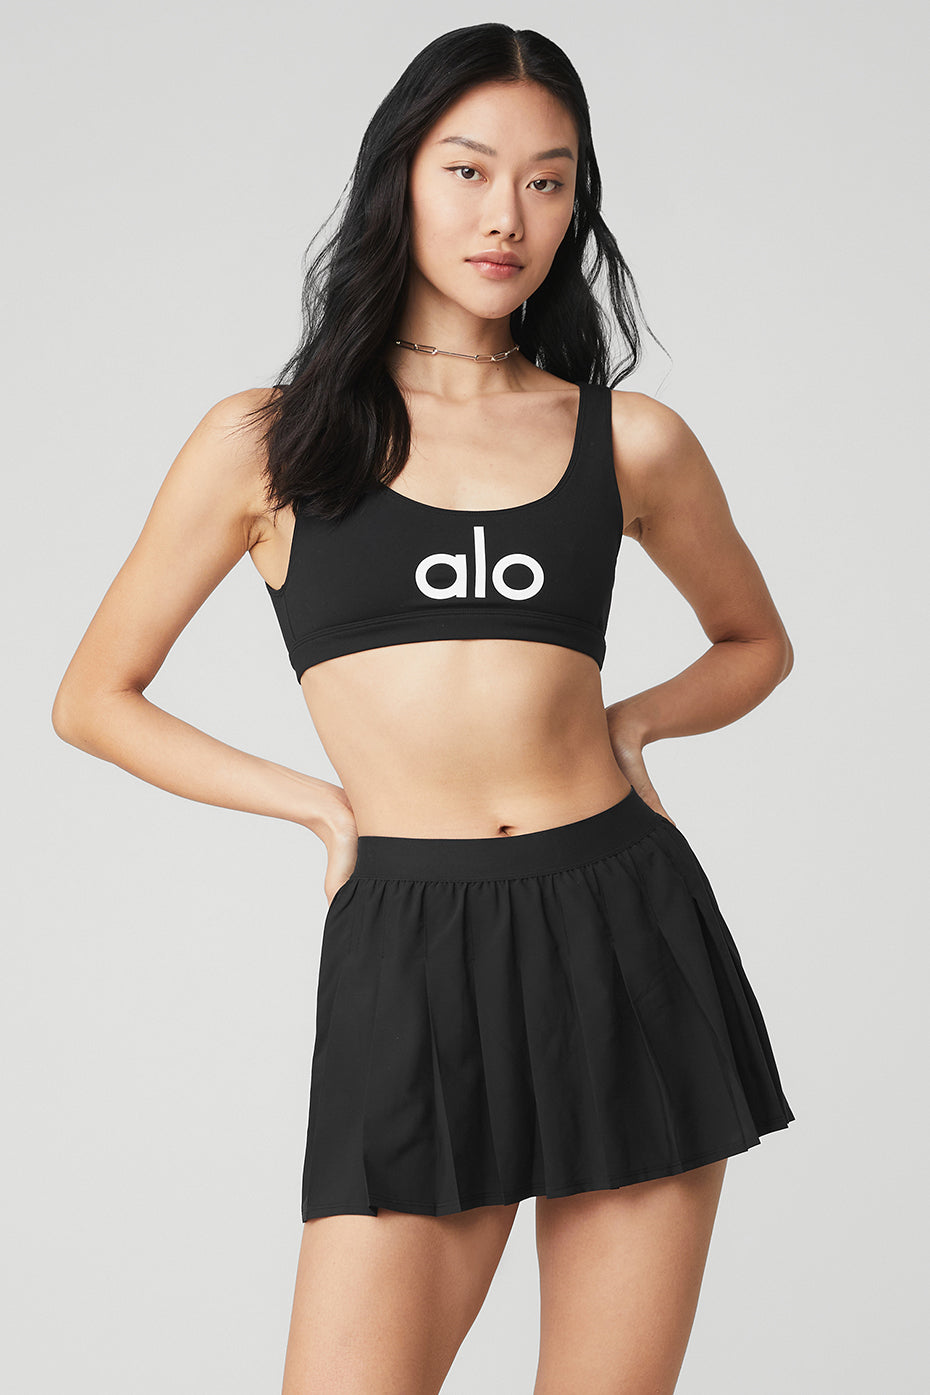 Alo Yoga - It's starting! 🎉 We're giving you EARLY ACCESS to our Black  Friday SALE! SHOP up to 30% - just use code: ALOVIP30 www.aloyoga.com |  Facebook